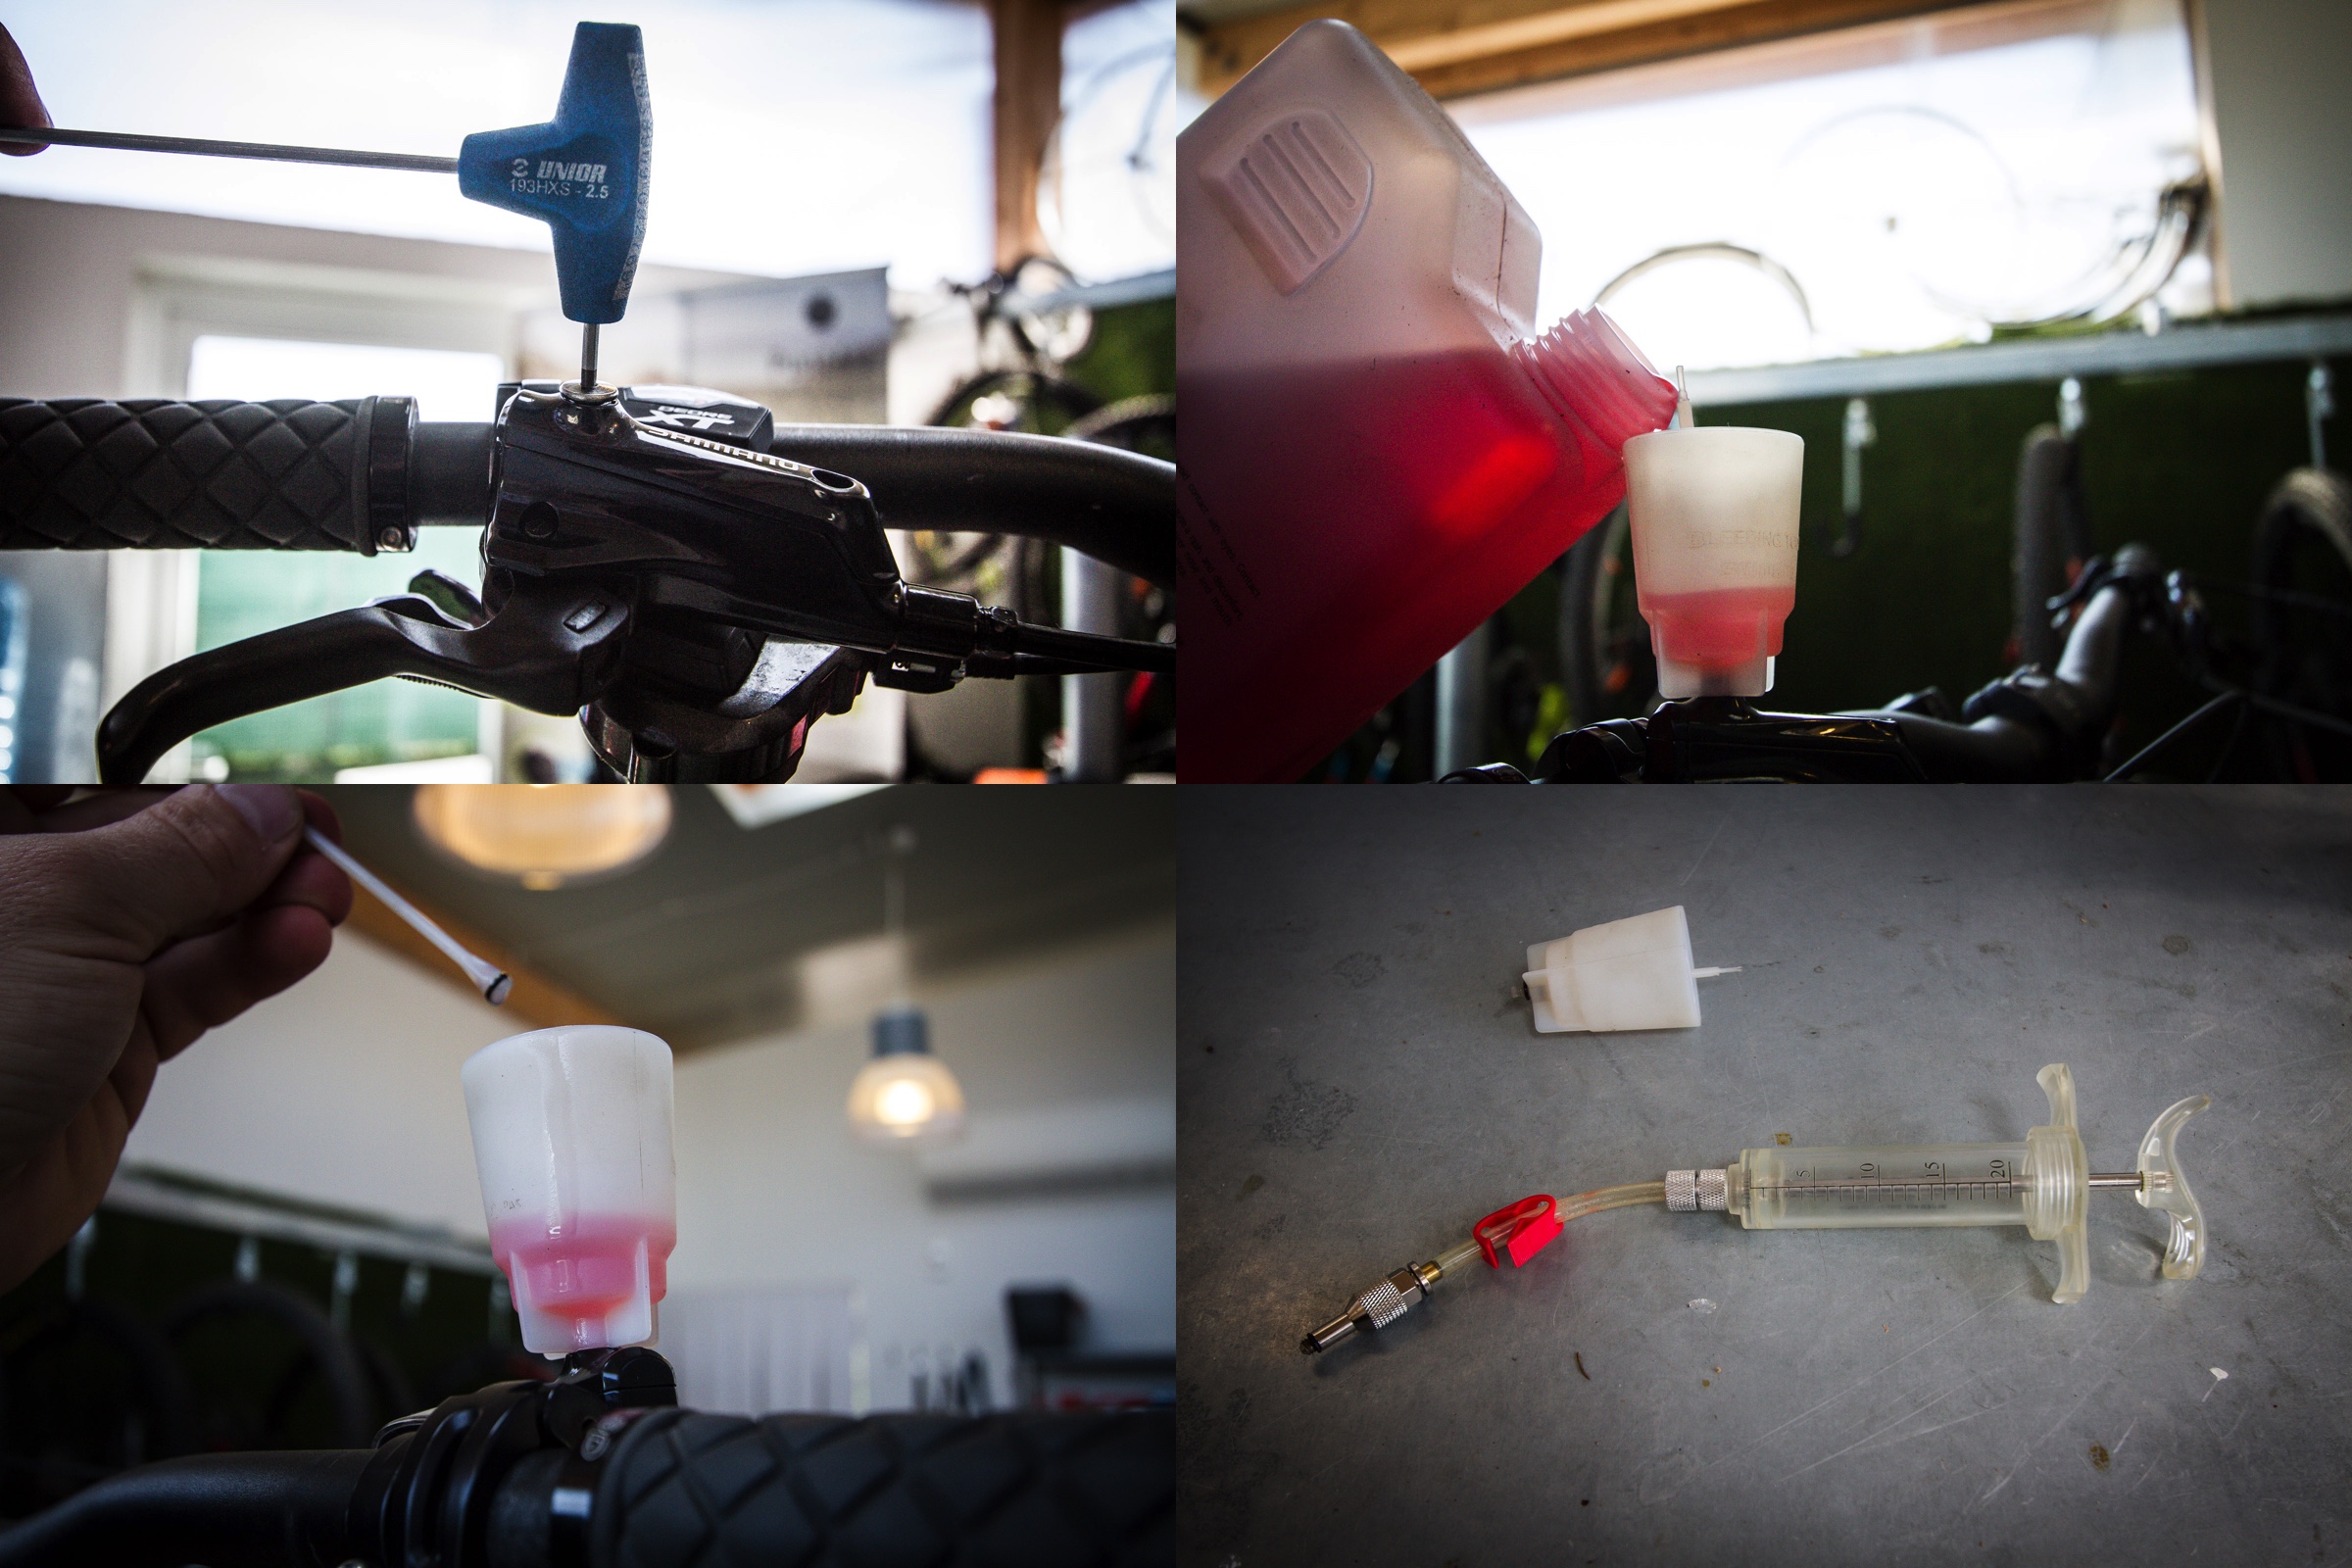 First we elevate the brake lever, then we use the special bleed cup and fill it half full, then allow the air to bubble up from the brake lever. The syringe pictured is for other brake systems. 